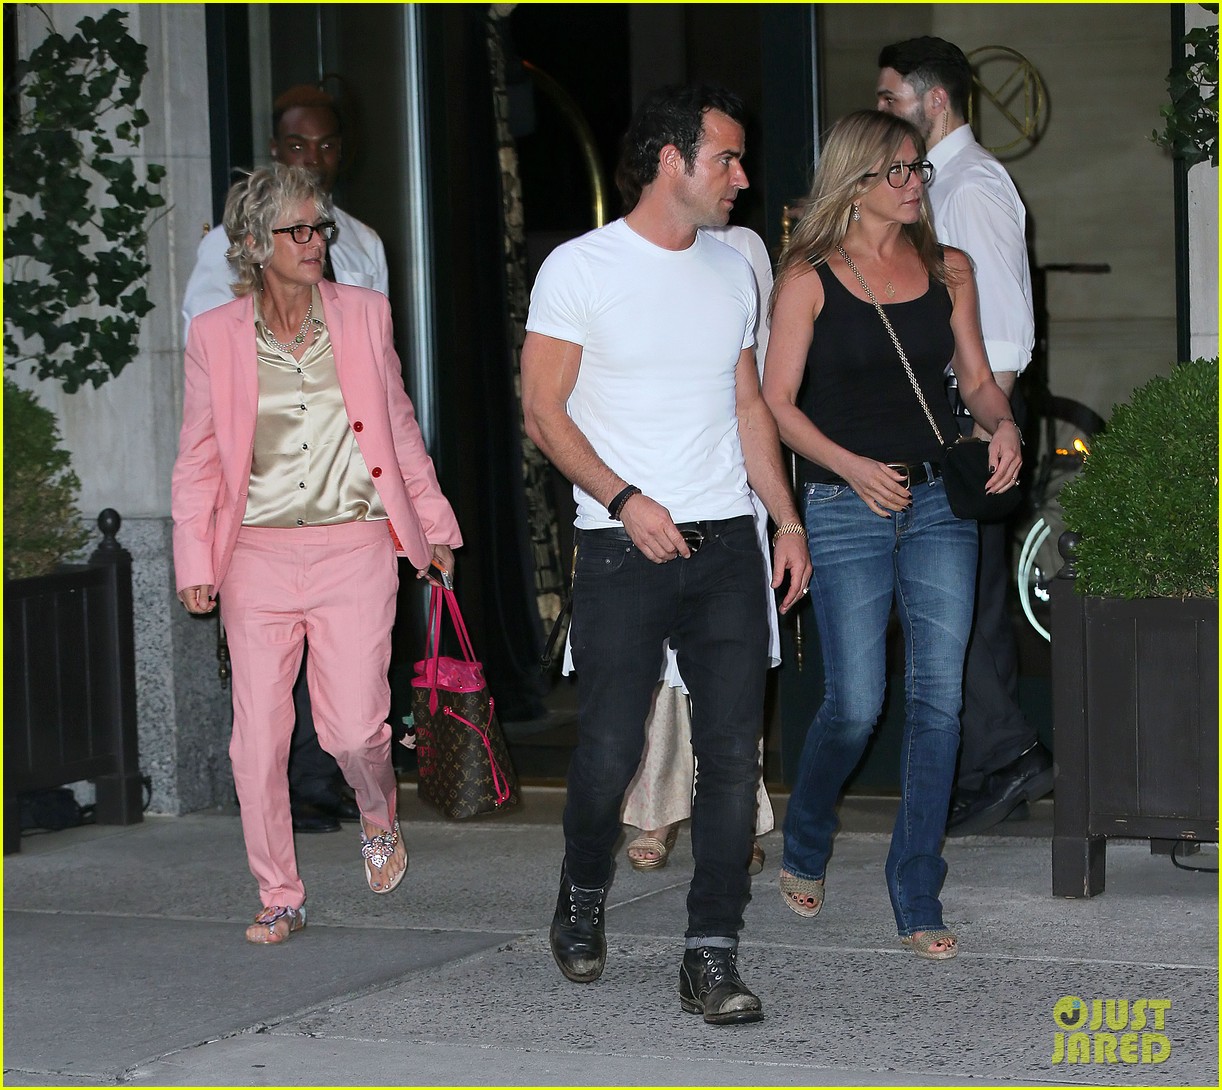 jennifer-aniston-justin-theroux-dinner-date-with-moms-04.jpg